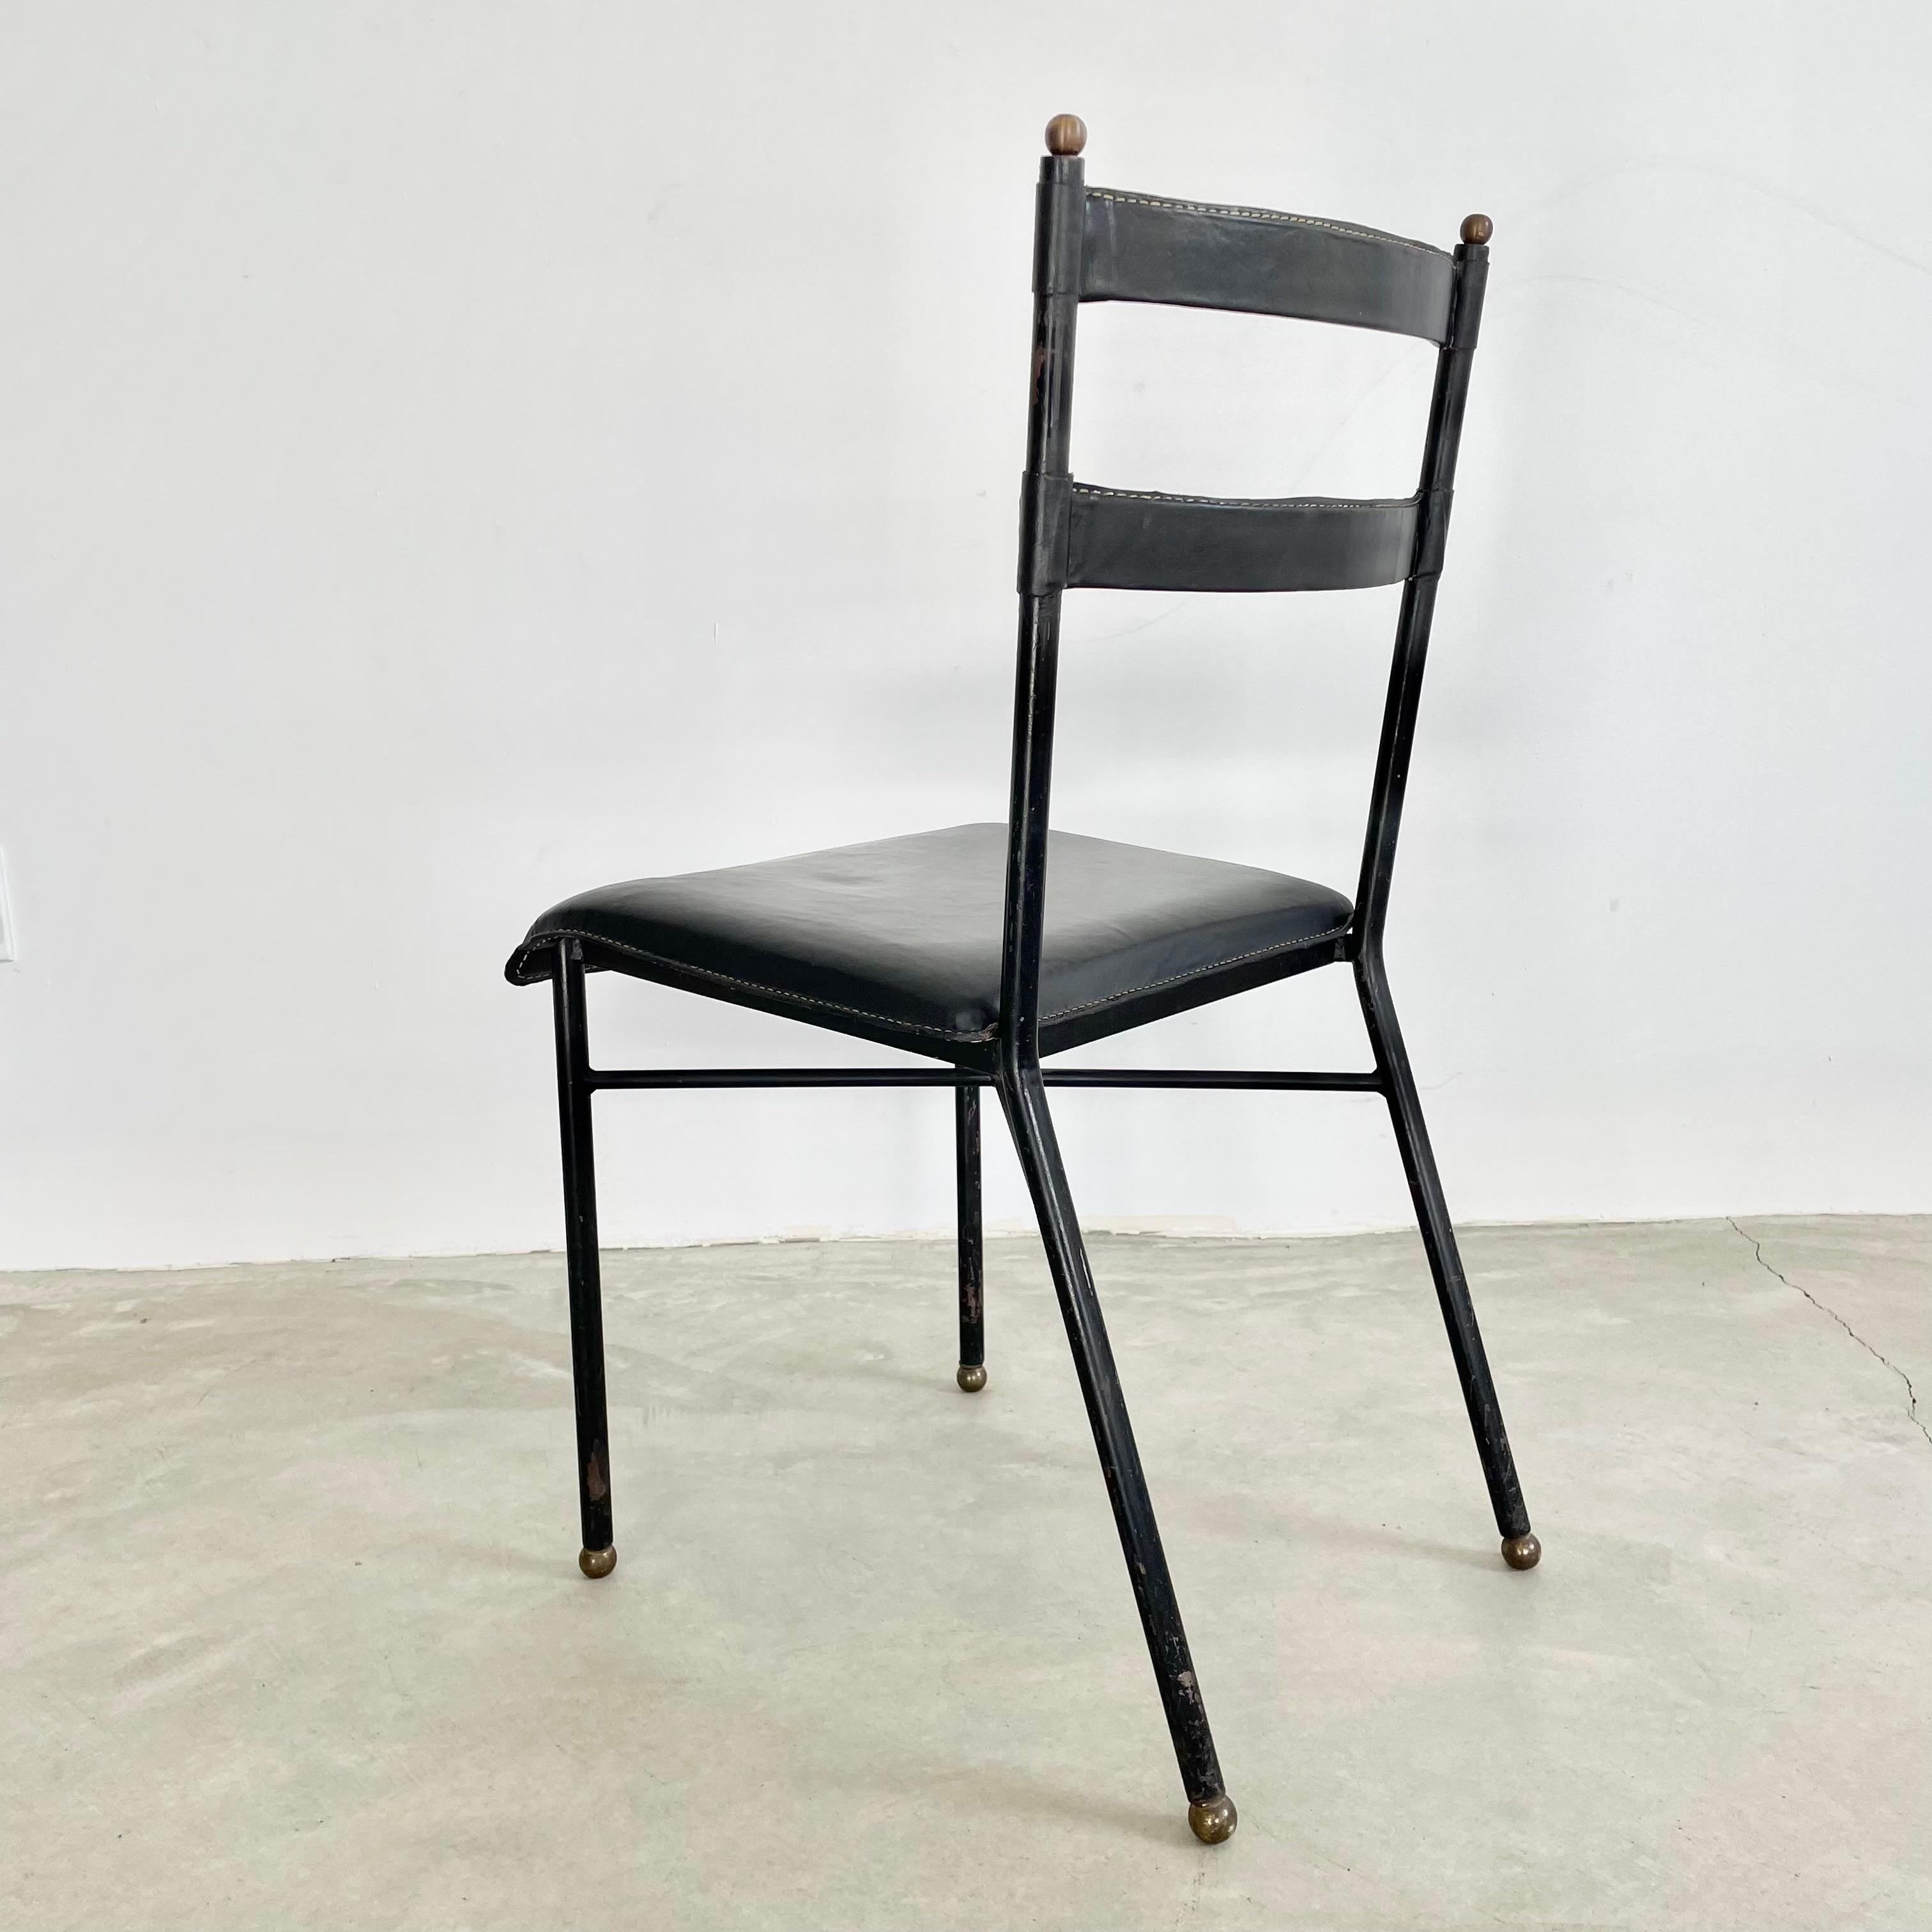 Brass Jacques Adnet Black Leather Chair, 1950s France For Sale